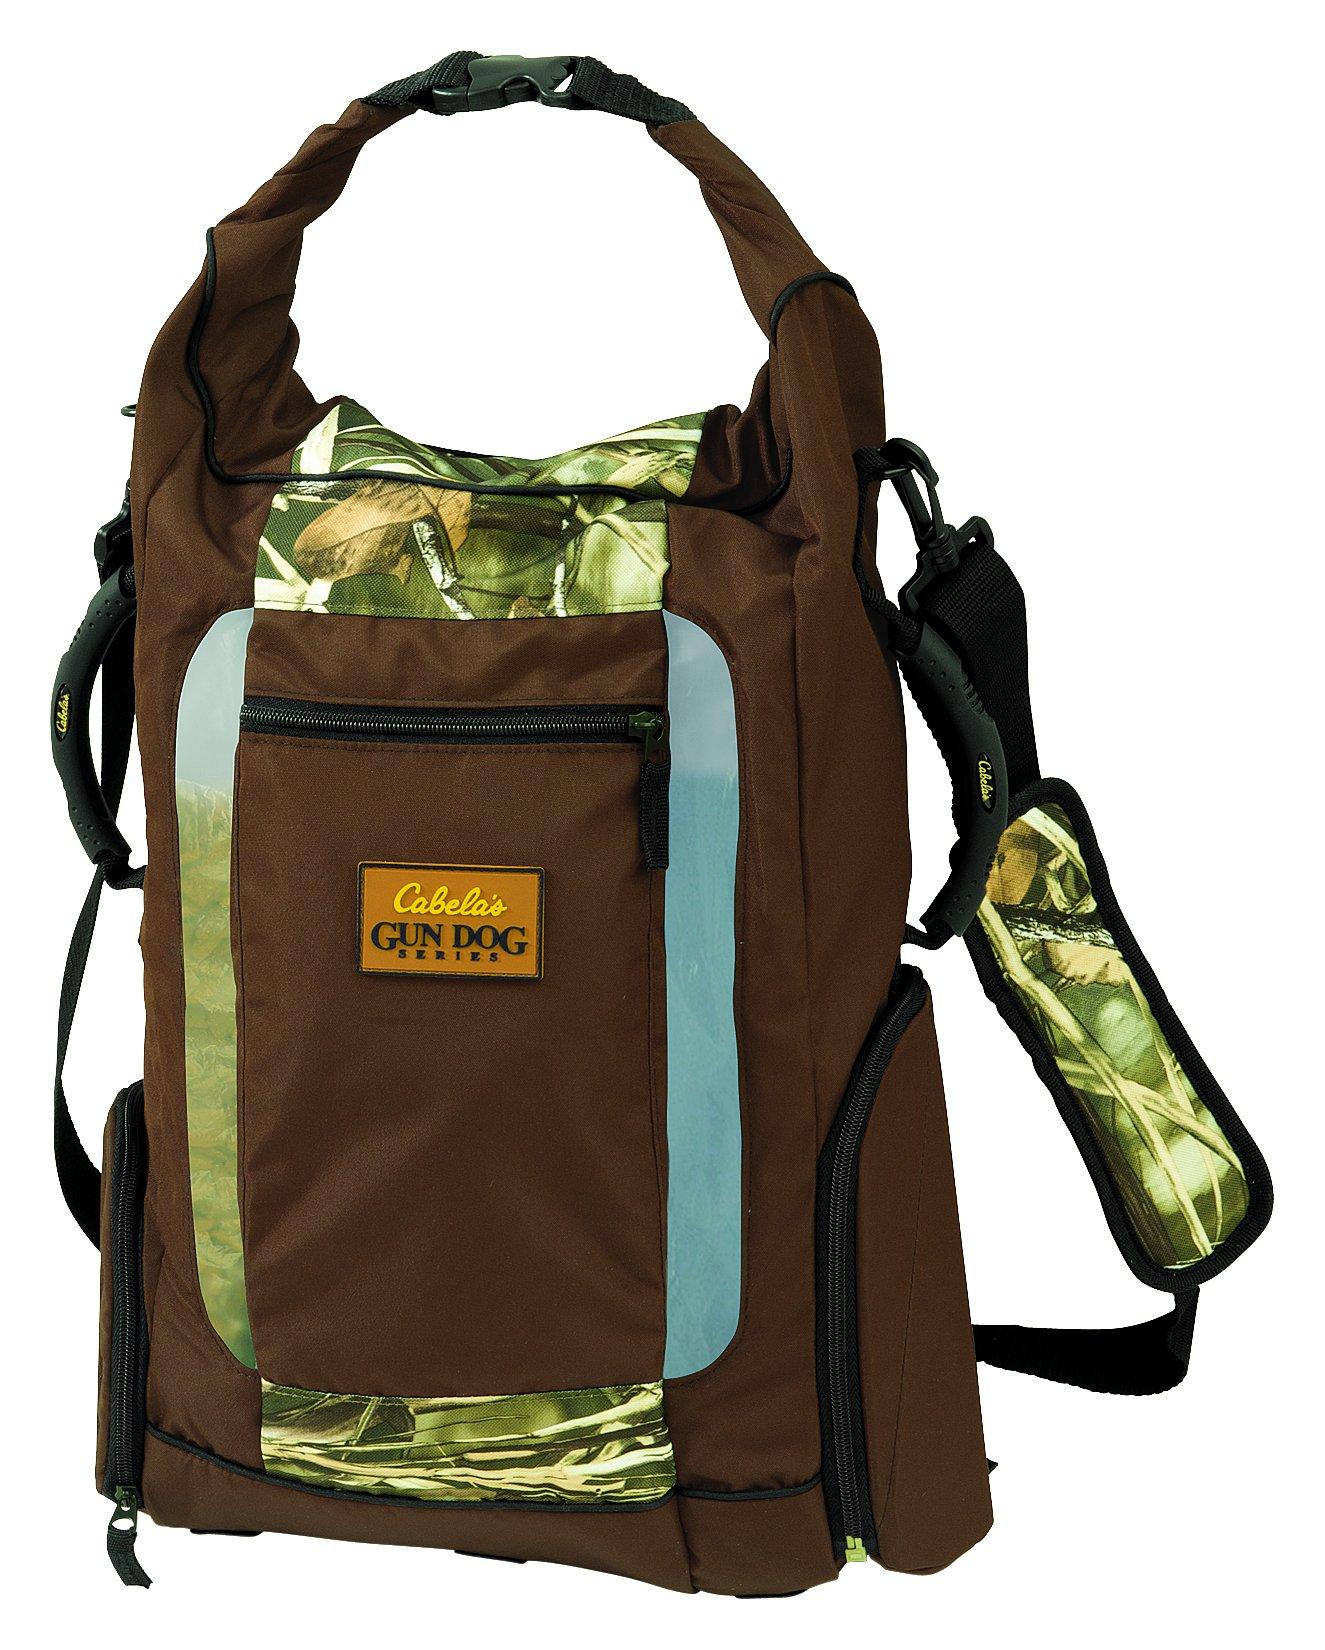 Cabela's Gun Dog Food and Hydration Pack